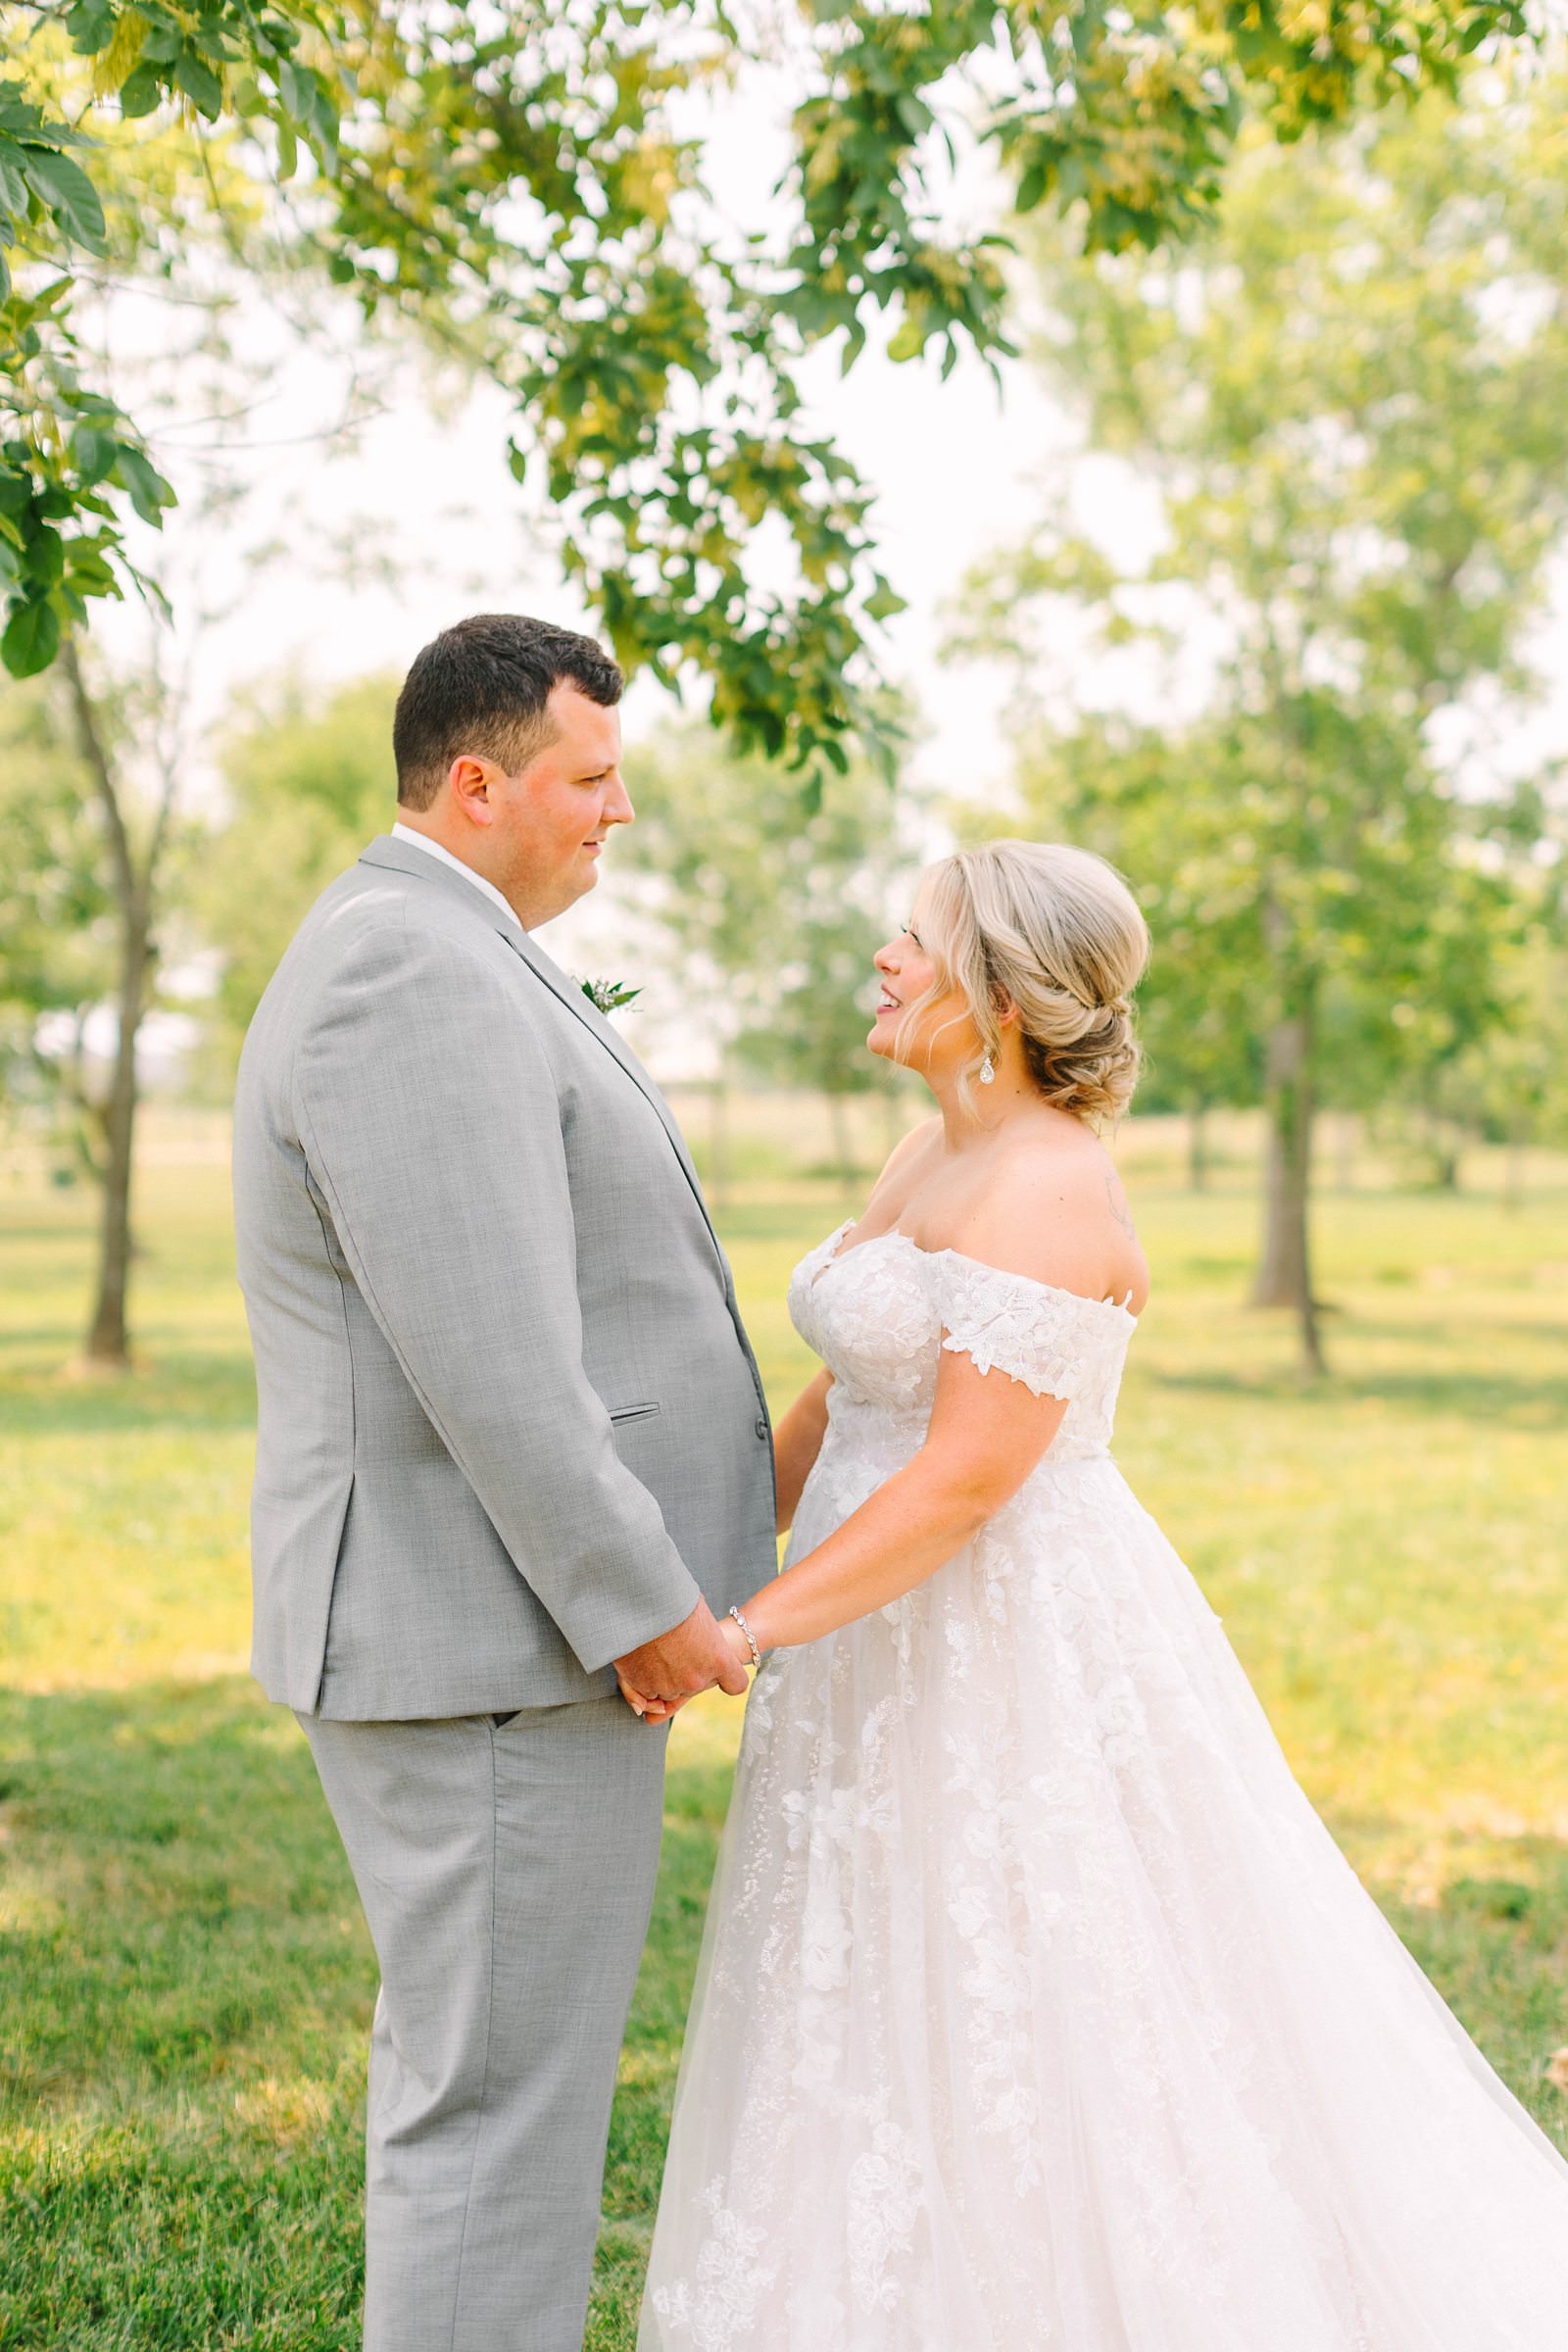 A Sunny Summer Wedding at Friedman Park in Newburgh Indiana | Paige and Dylan | Bret and Brandie Photography066.jpg